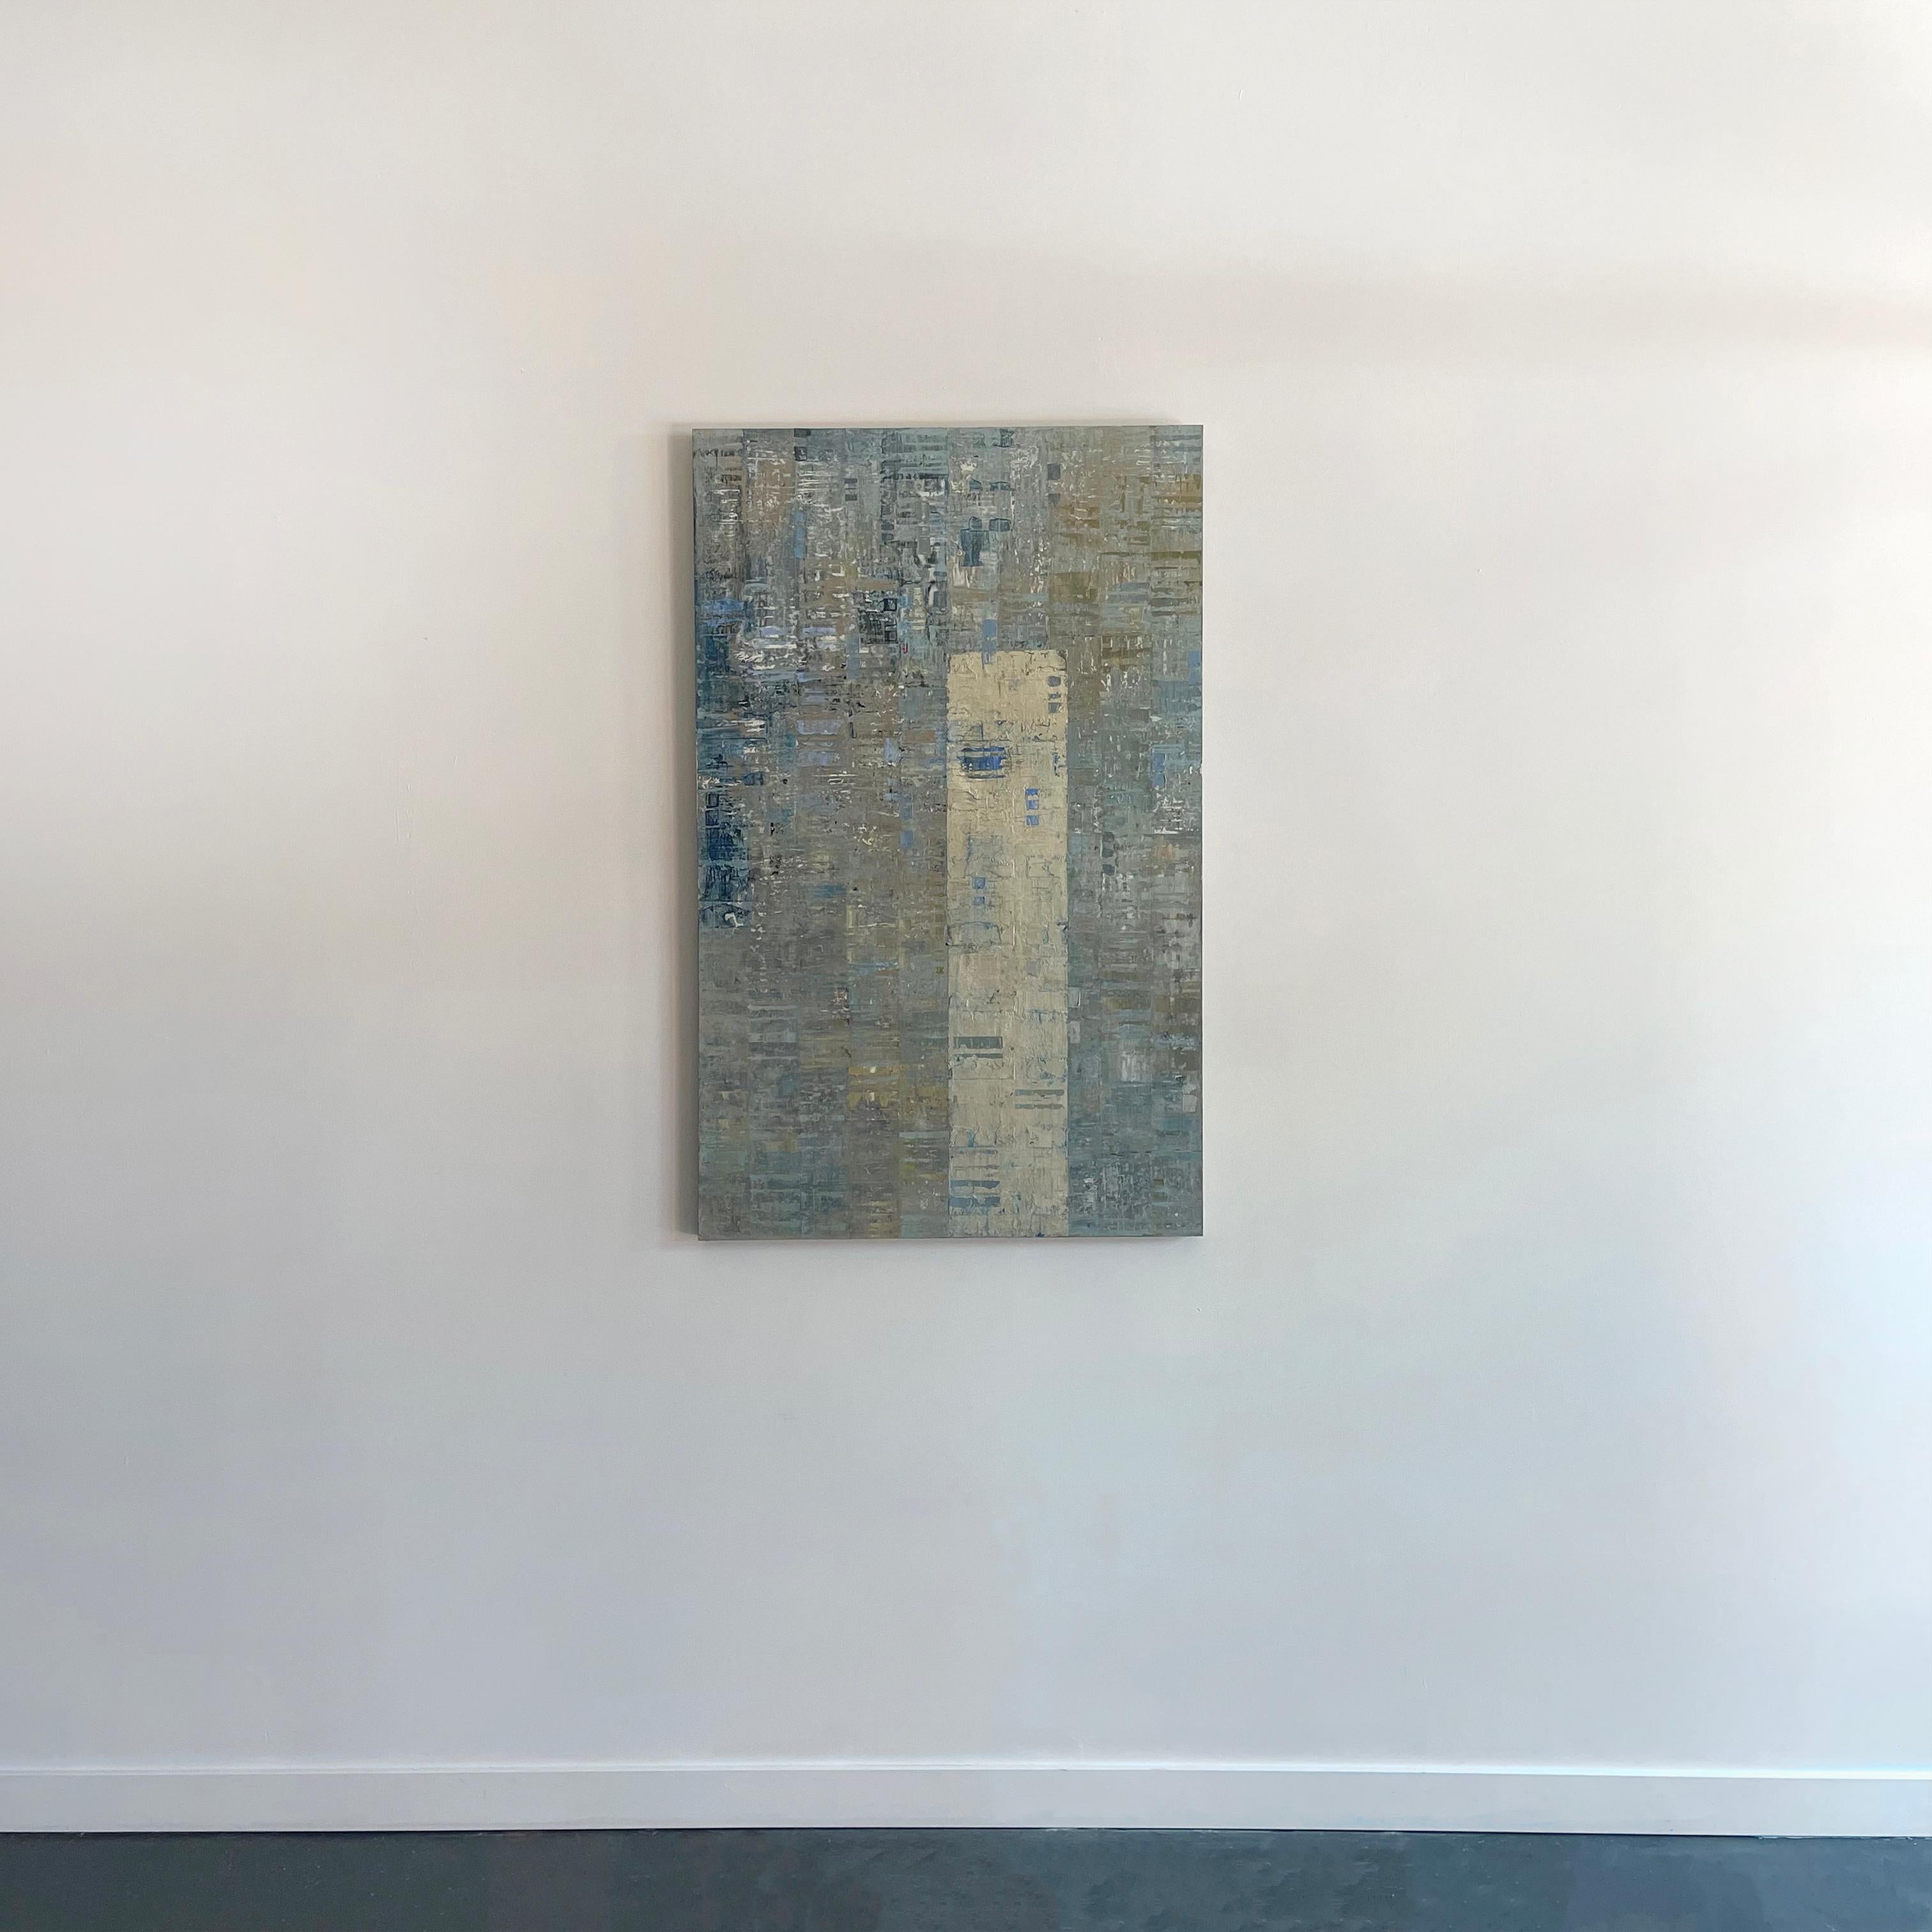 This abstract metallic painting by Ned Martin is made with oil paint and silver leaf on board. Layers of blue and grey paint are accented by a warmer umber color, while a large silver metallic rectangle extends from one edge of the canvas into the